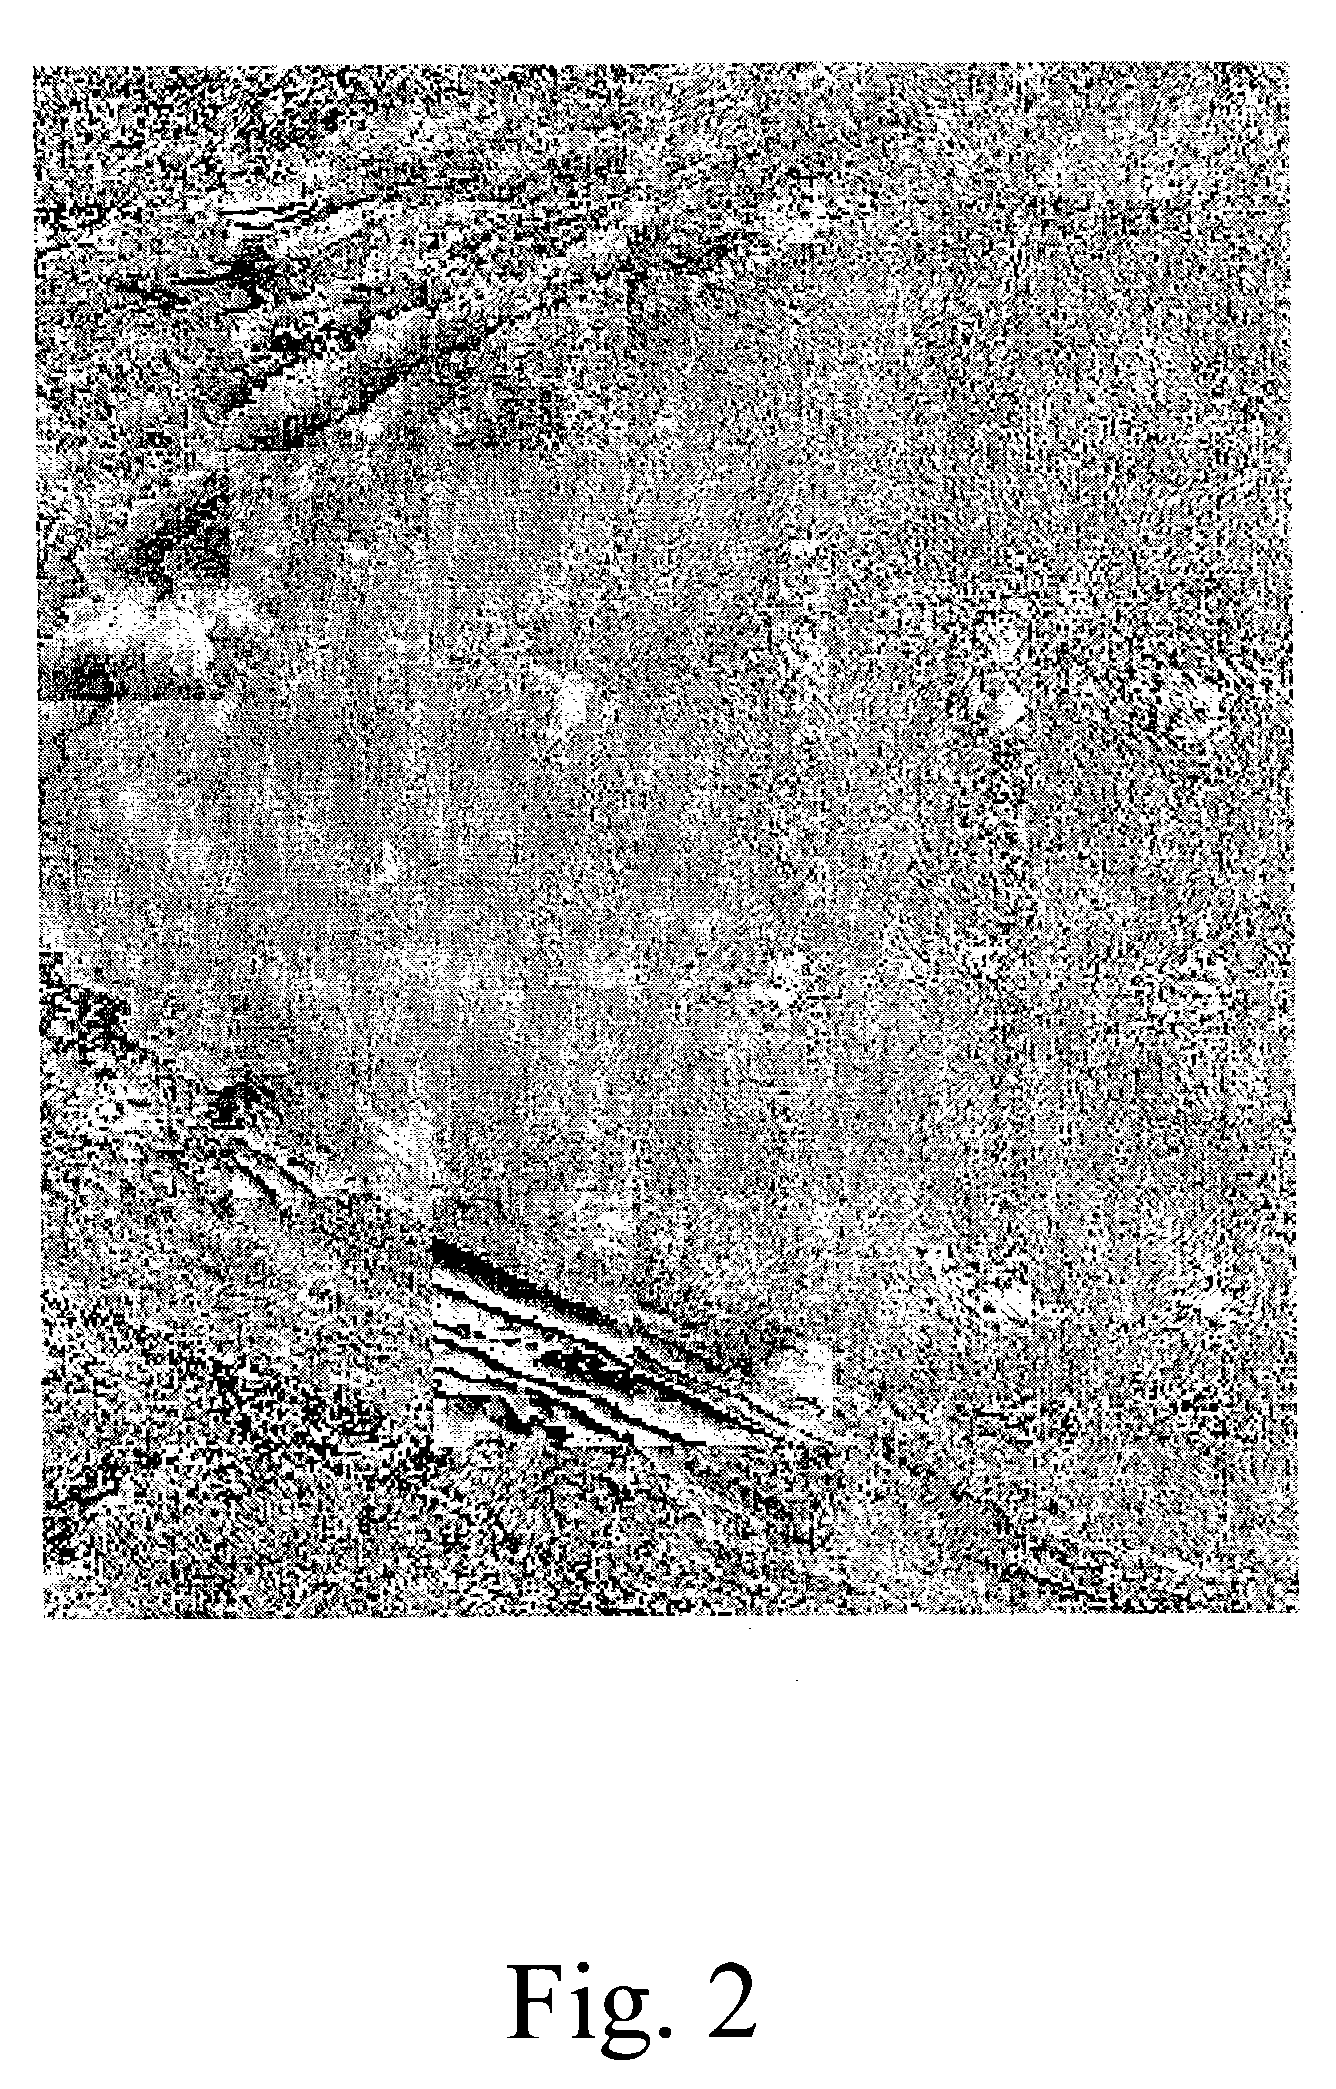 Method and system for compressing a continuous data flow in real-time using cluster successive approximation multi-stage vector quantization (SAMVQ)